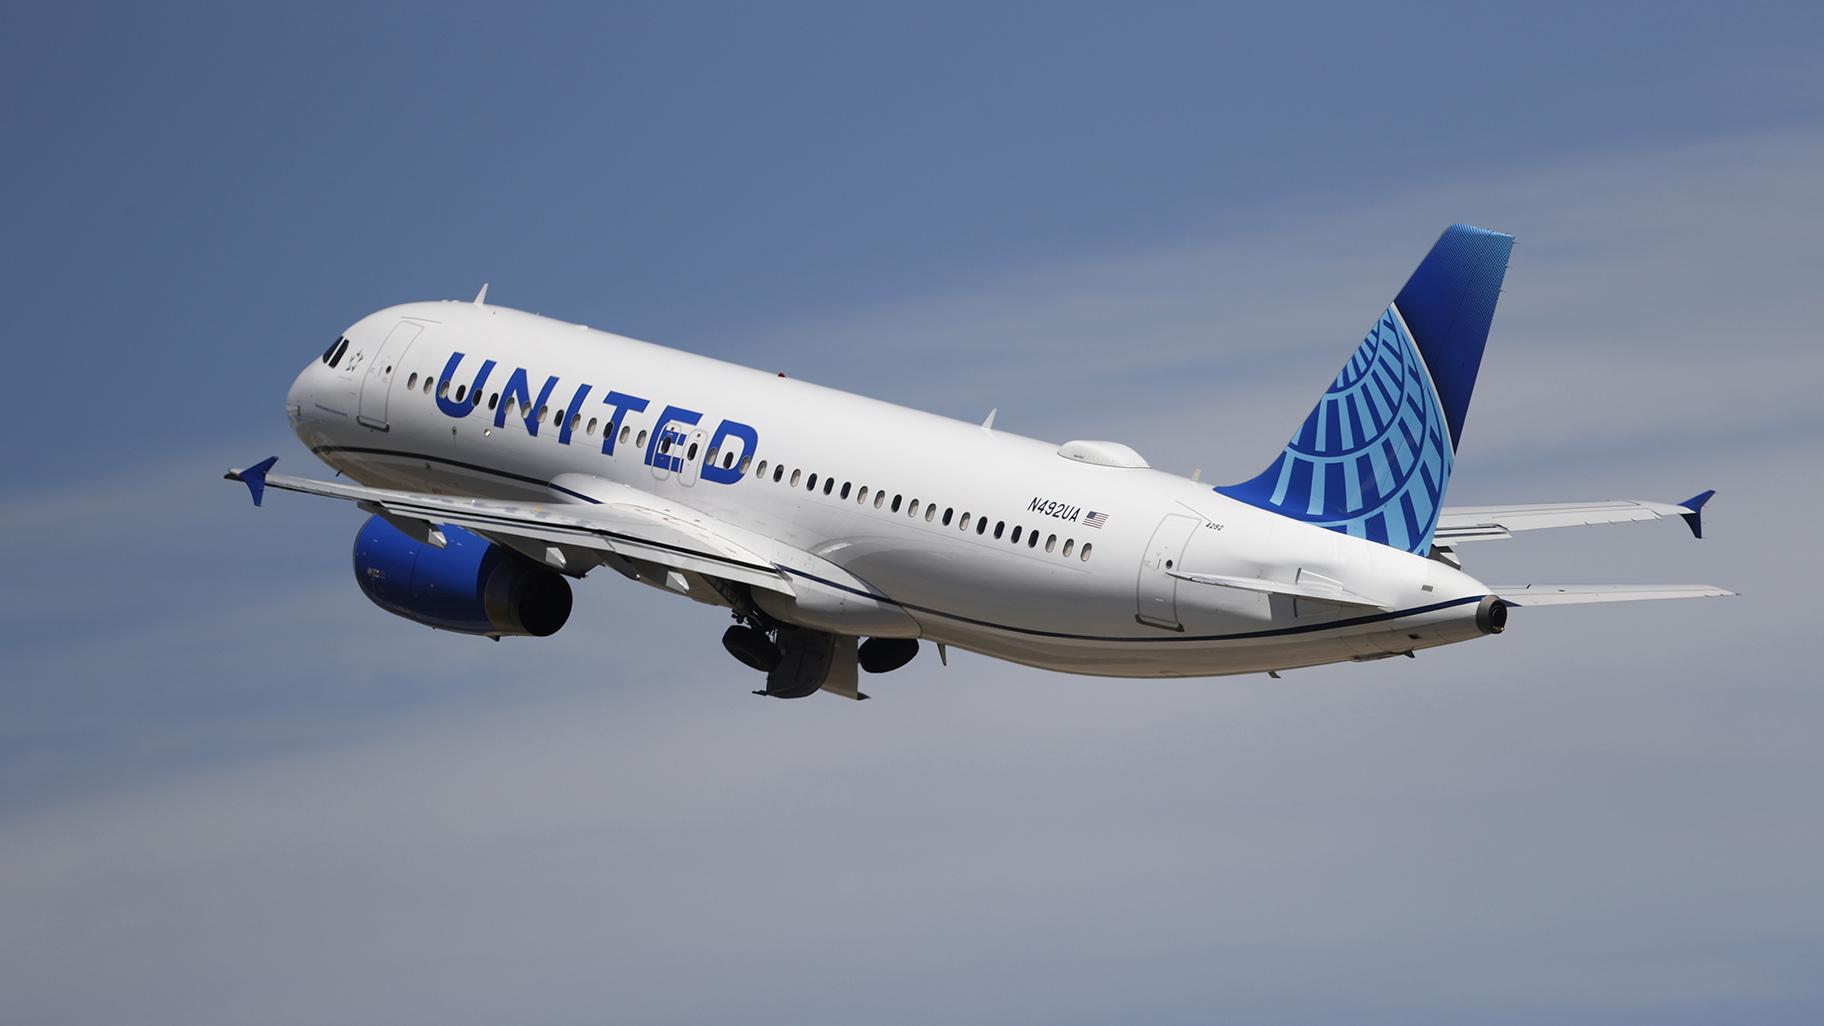 A United Airlines jetliner lifts off from Denver International Airport, June 10, 2020, in Denver. United Airlines said Wednesday, May 3, 2023, that it hired 7,000 new workers in the first four months of this year and plans to hit 15,000 new hires by year end, matching the number it hired last year. (AP Photo / David Zalubowski, File)